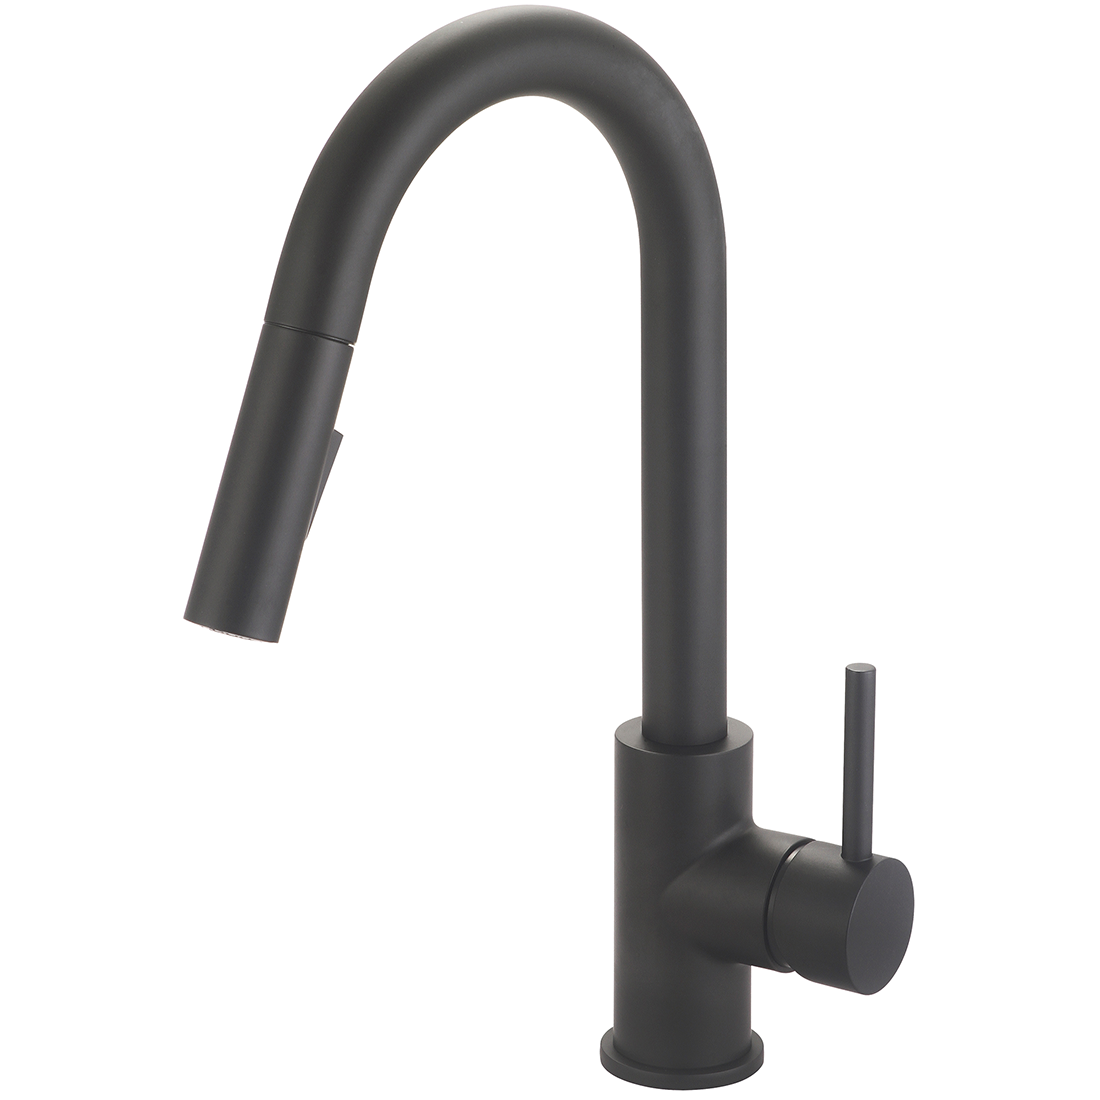 i2v Olympia Single Handle Pull-Down Kitchen Faucet Model# K-5080